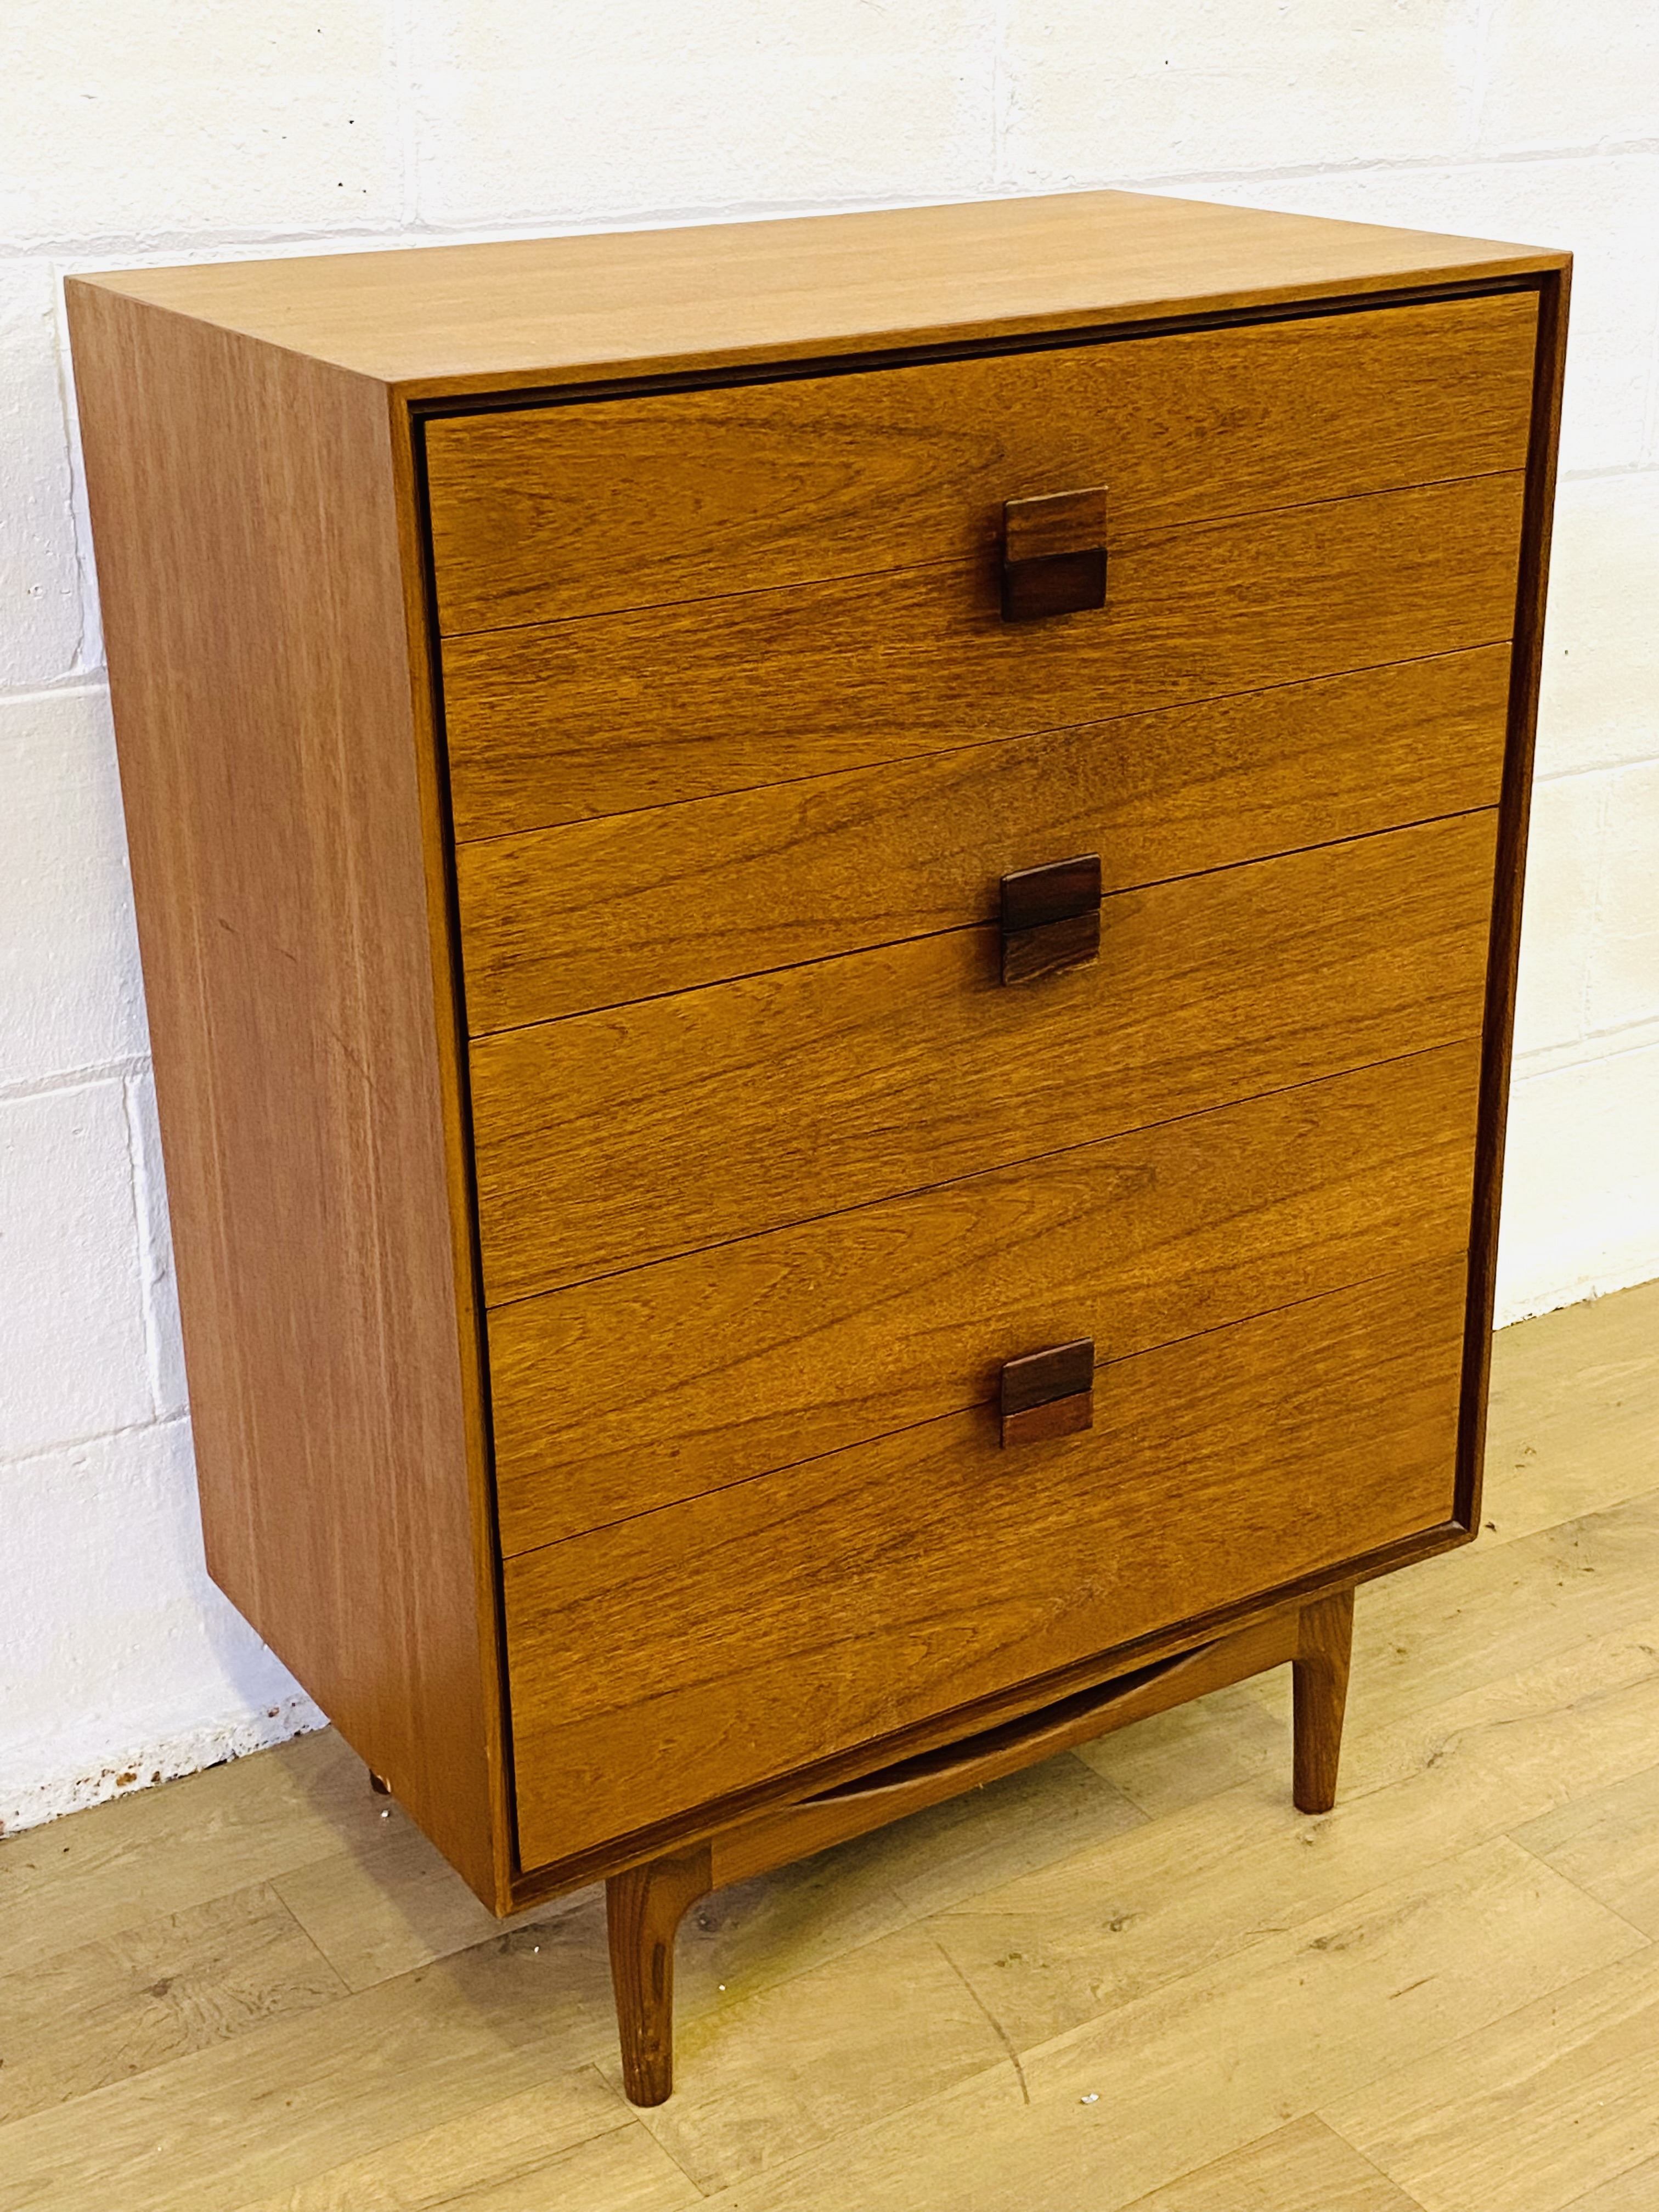 Teak G plan chest of drawers - Image 5 of 6